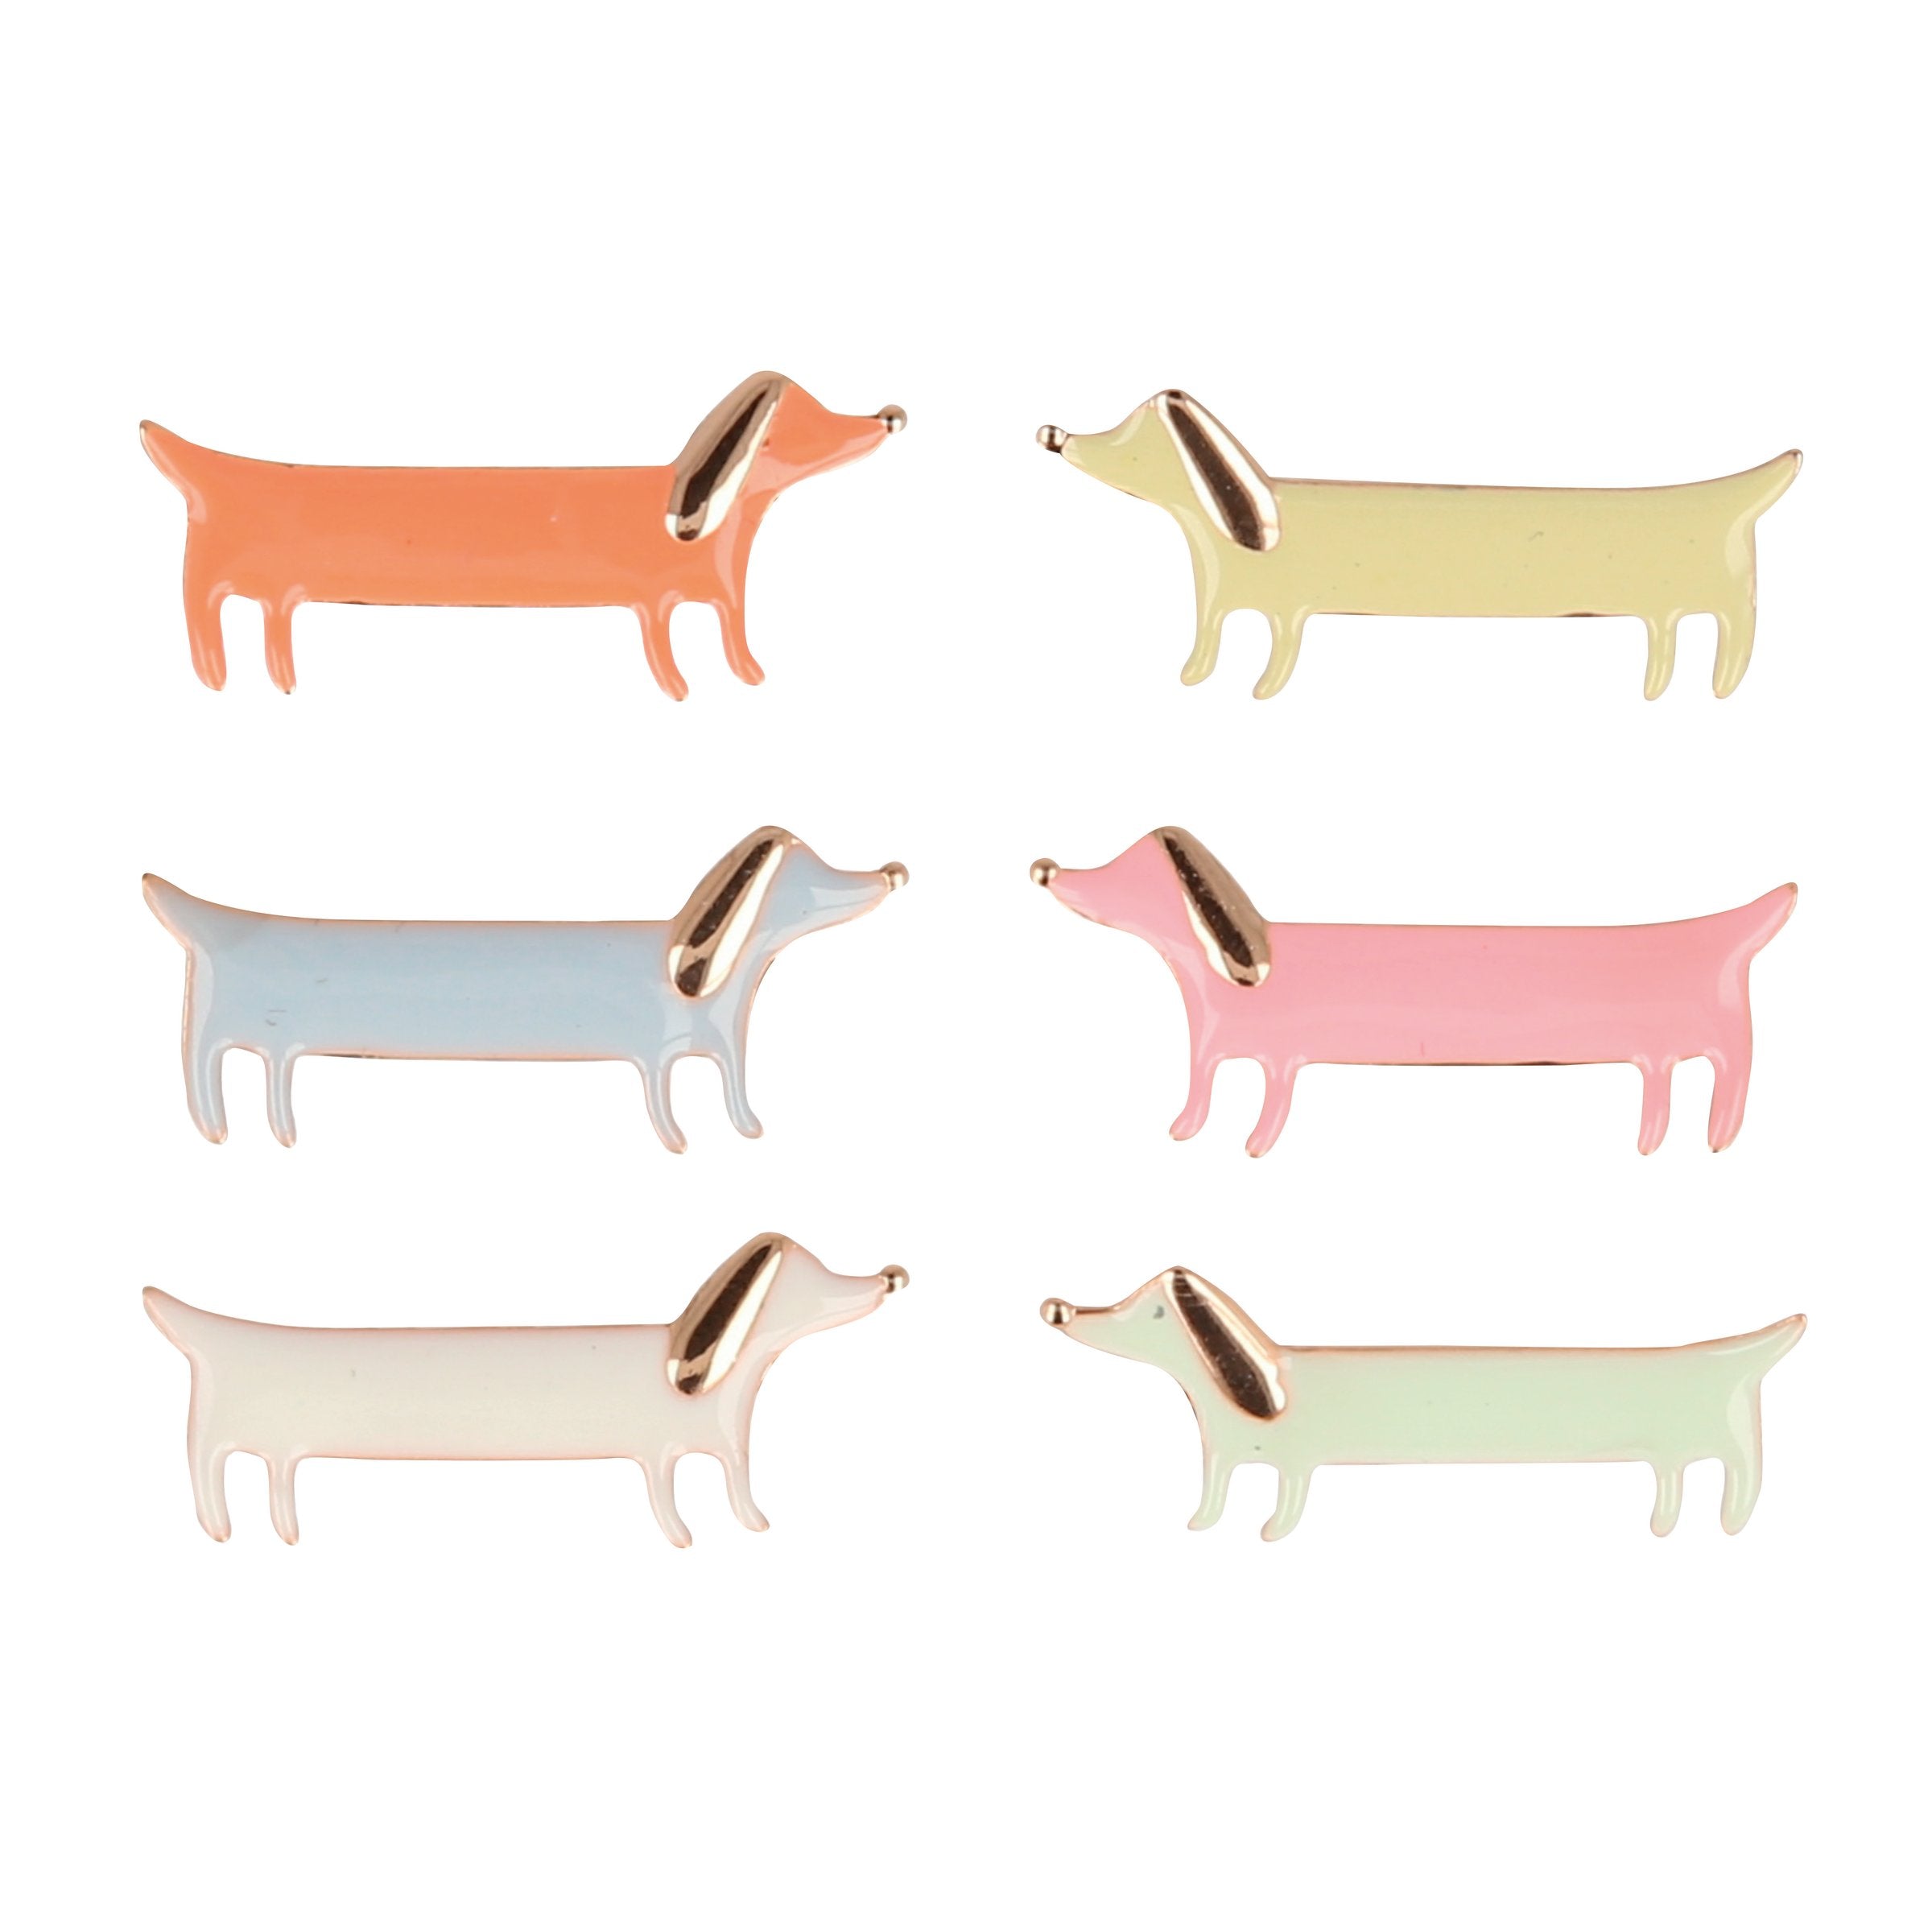 Our sausage dog crackers, with are the perfect kids' Christmas crackers.